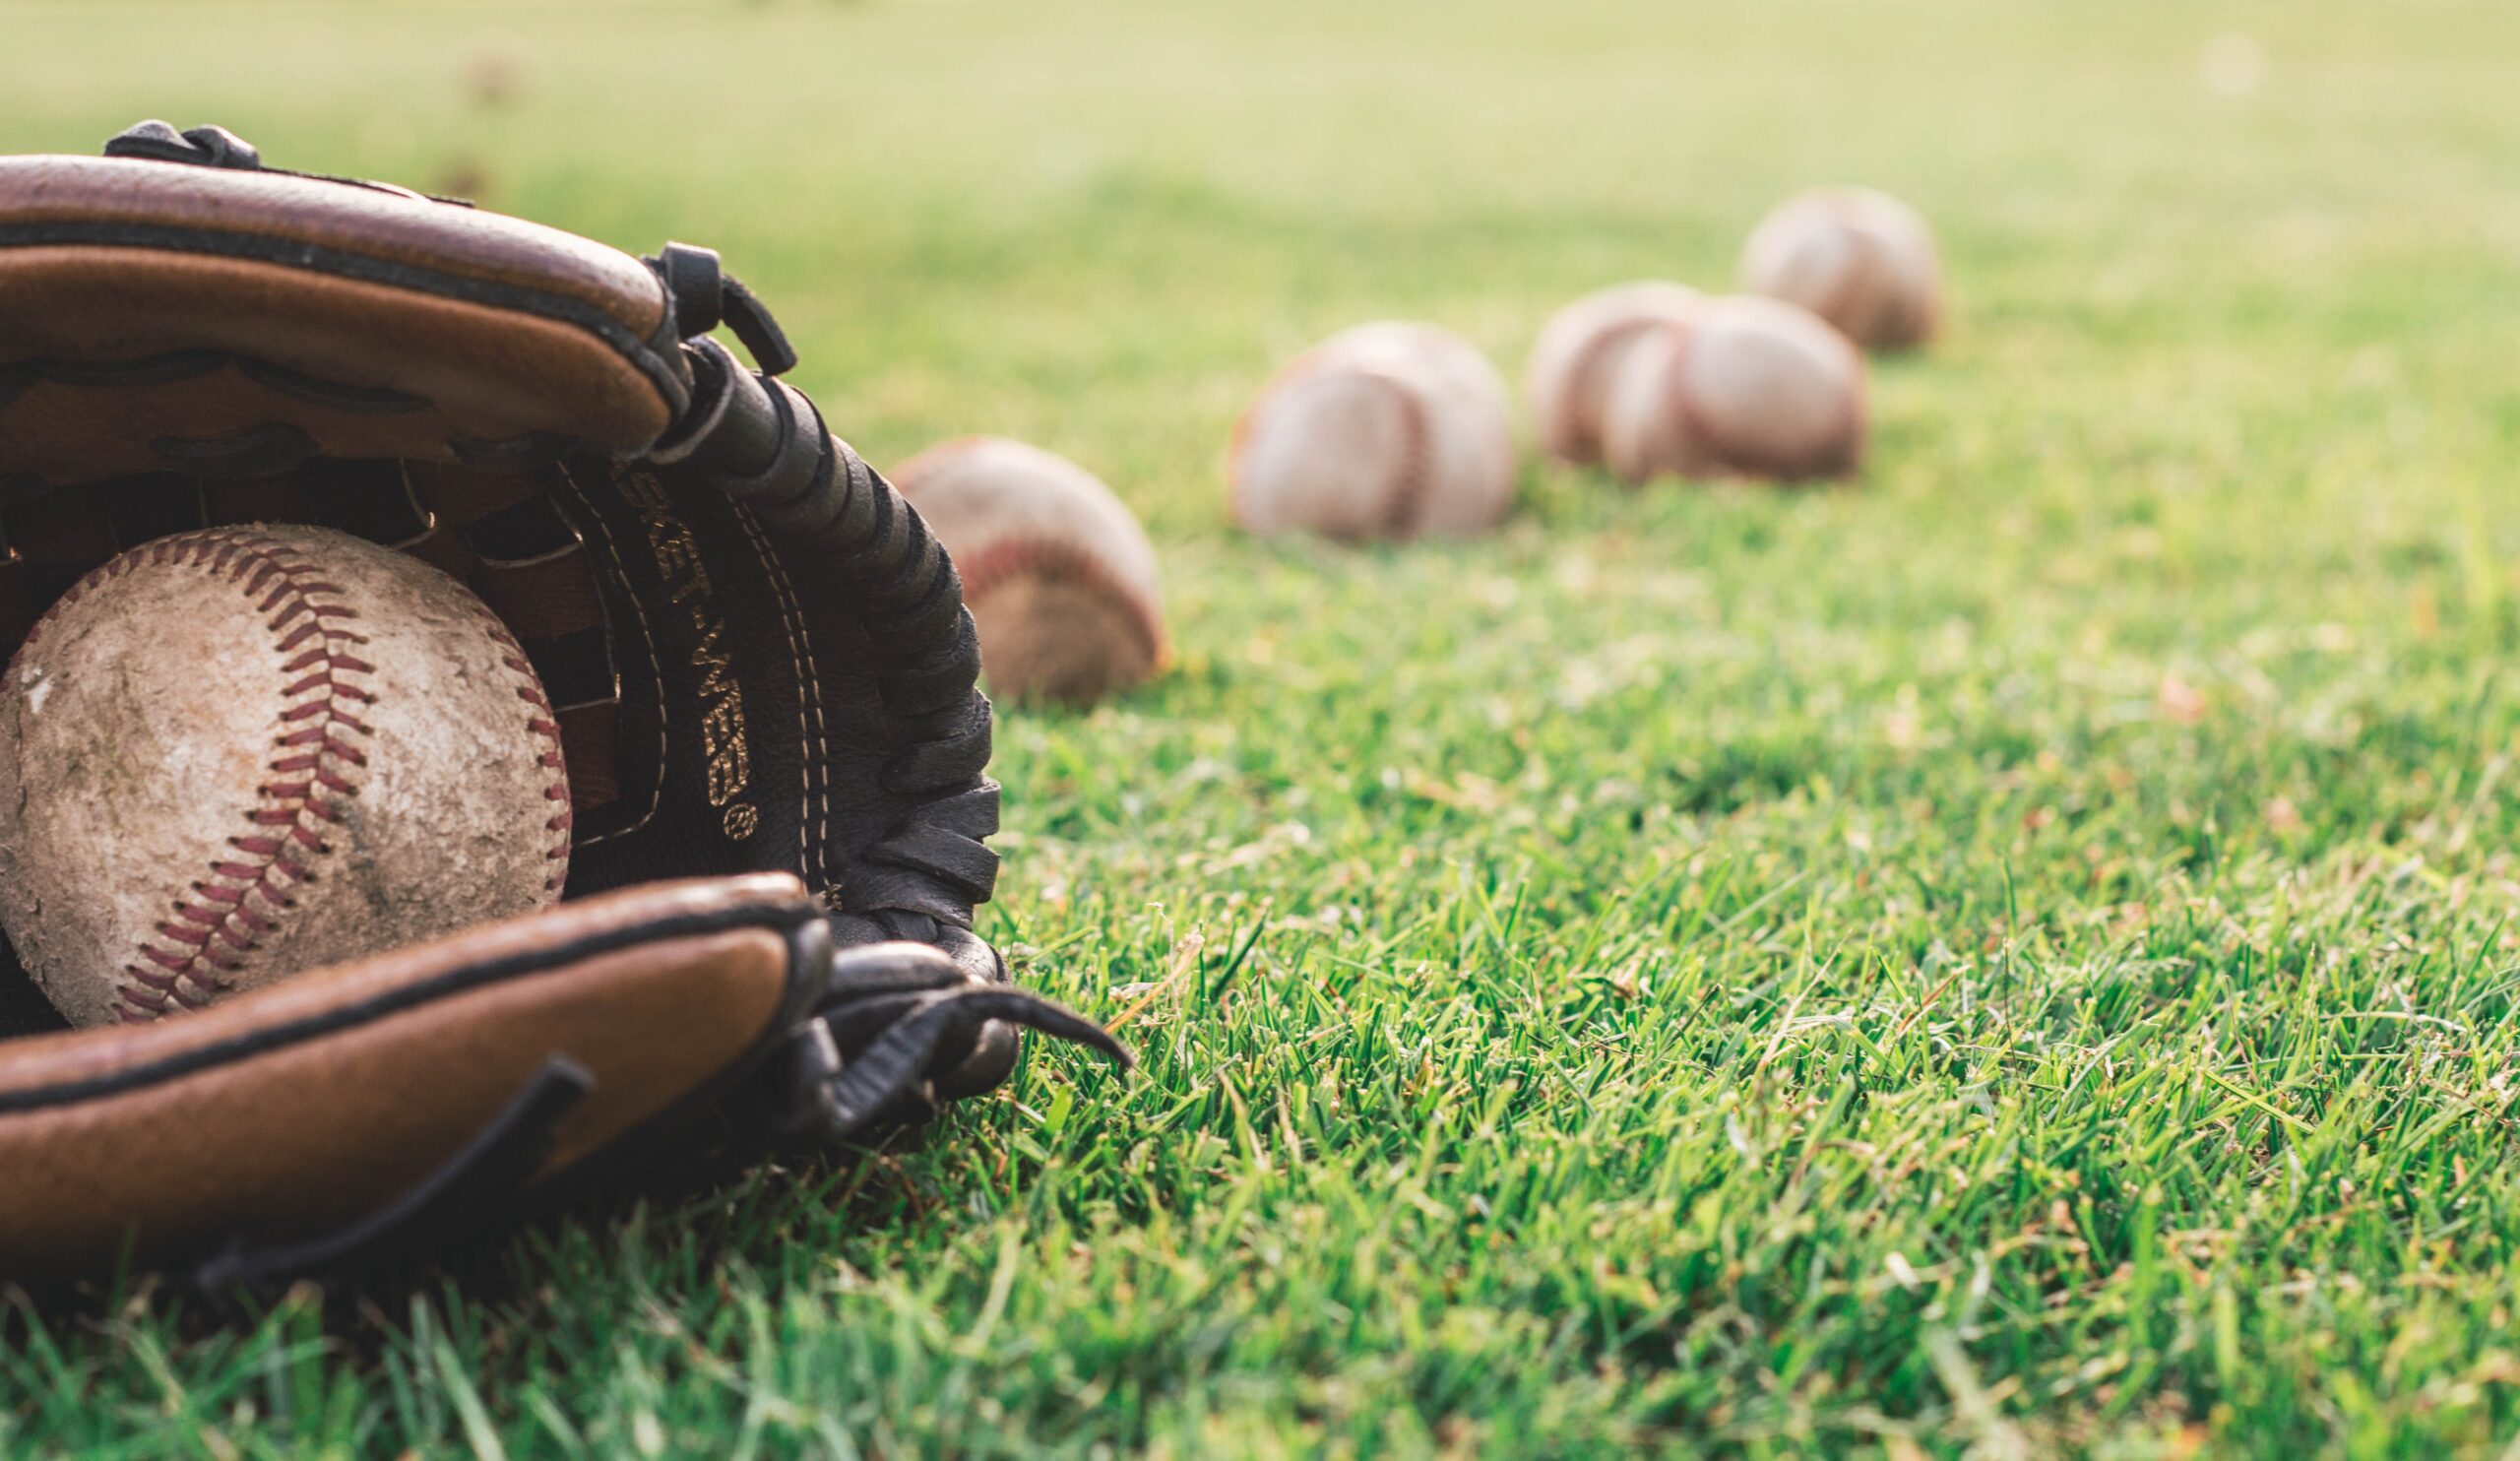 Baseballs and a glove laying on some grass